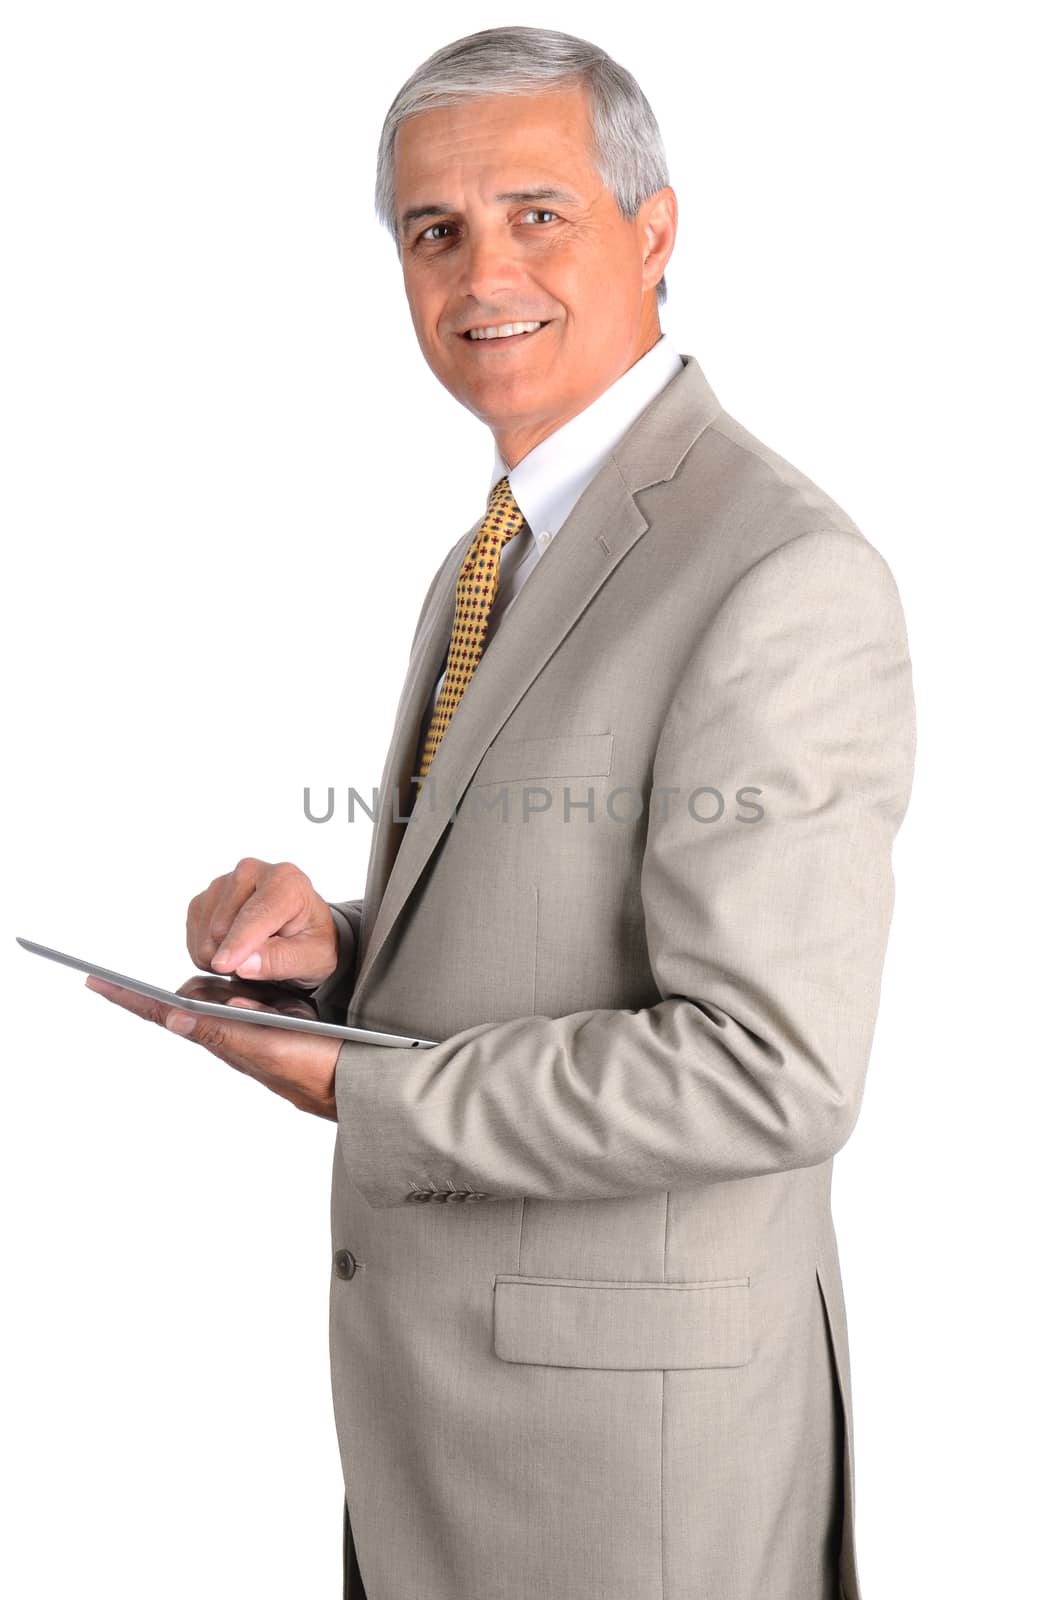 Portrait of a smiling middle aged businessman in a light suit with a tablet computer. Three quarters view over a white background.